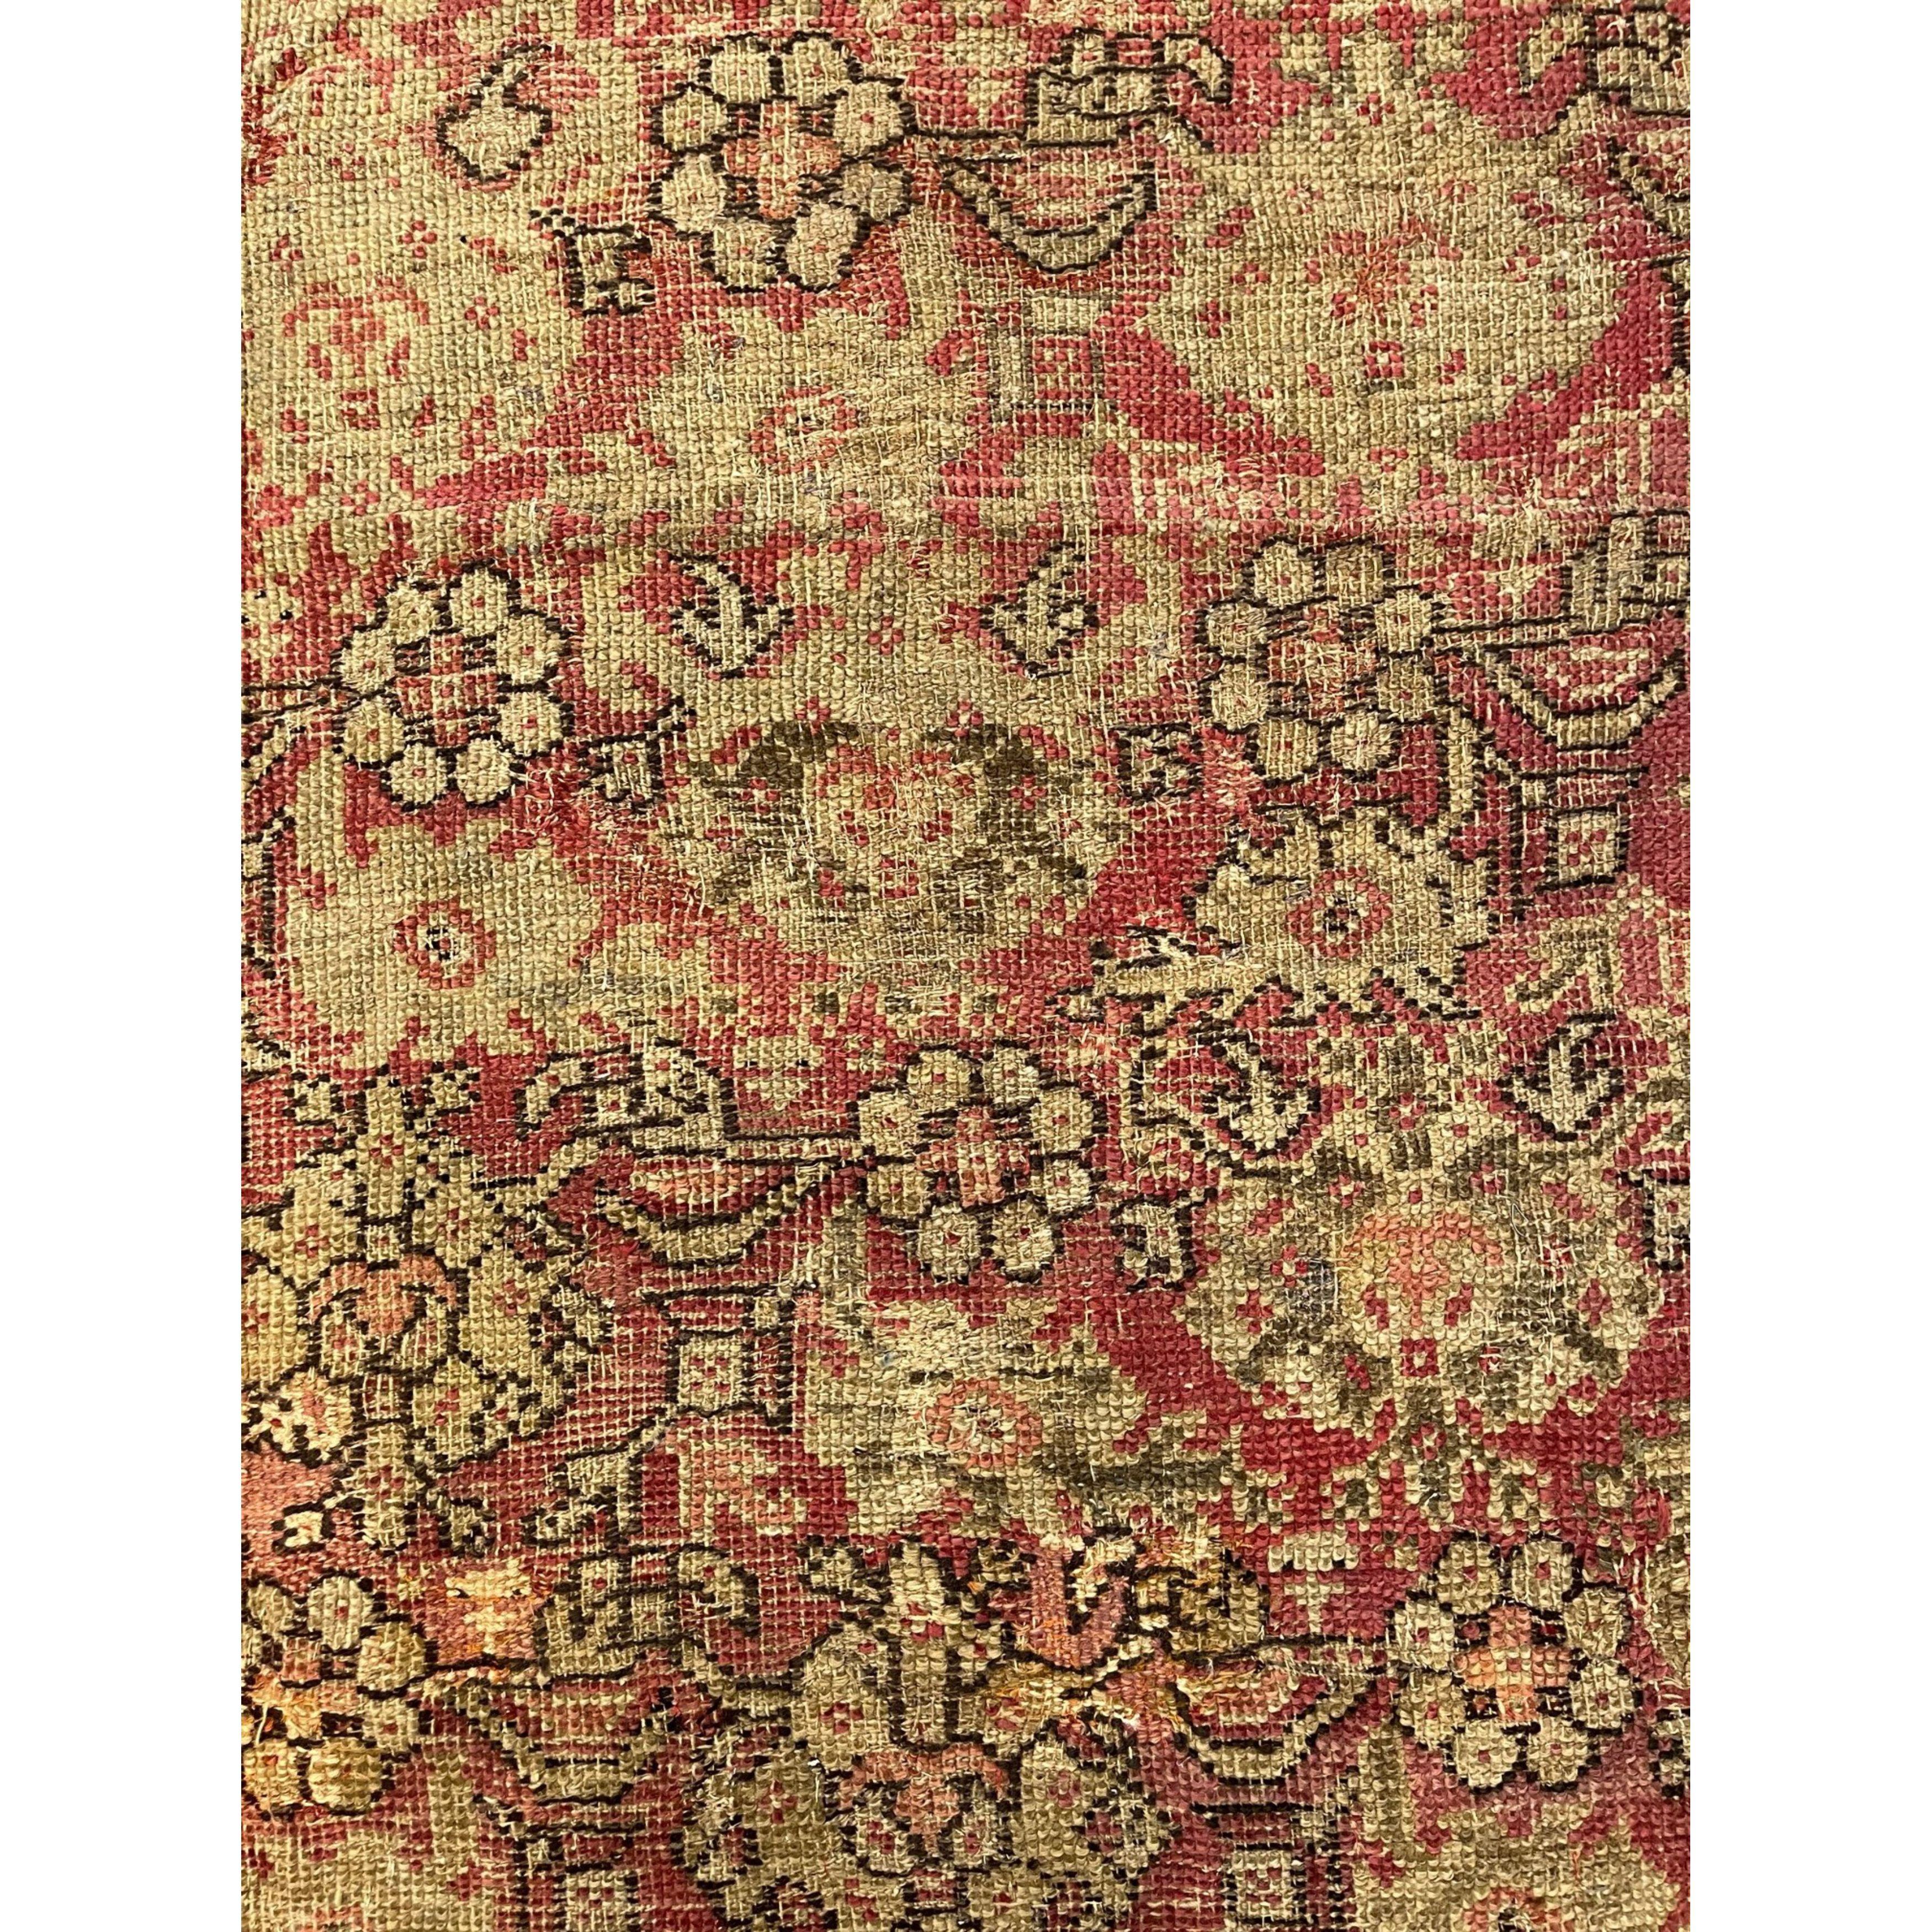 Ghiordes Rugs (also spelled Giordes) – The famous rugs of Ghiordes captured the hearts of European collectors in the 1700’s. Early Ghiordes prayer rugs are among the most iconic of their type in Anatolia and the surrounding area. They traditionally